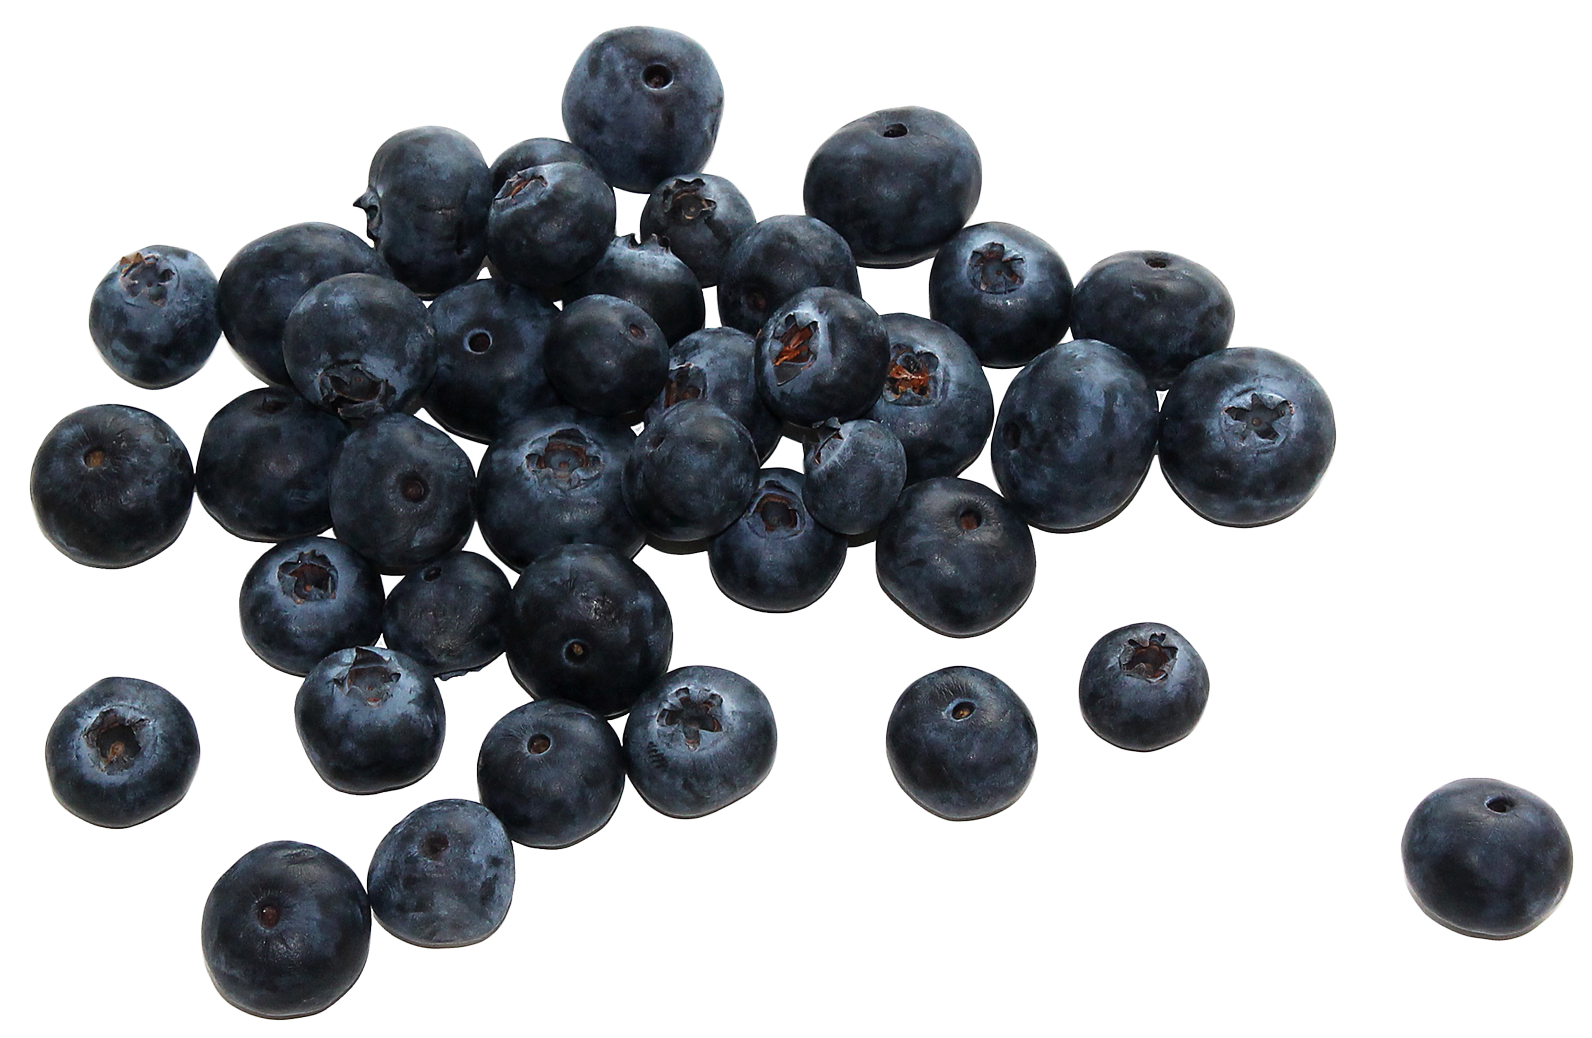 Blueberry Png Transparent - Blueberry, Transparent background PNG HD thumbnail